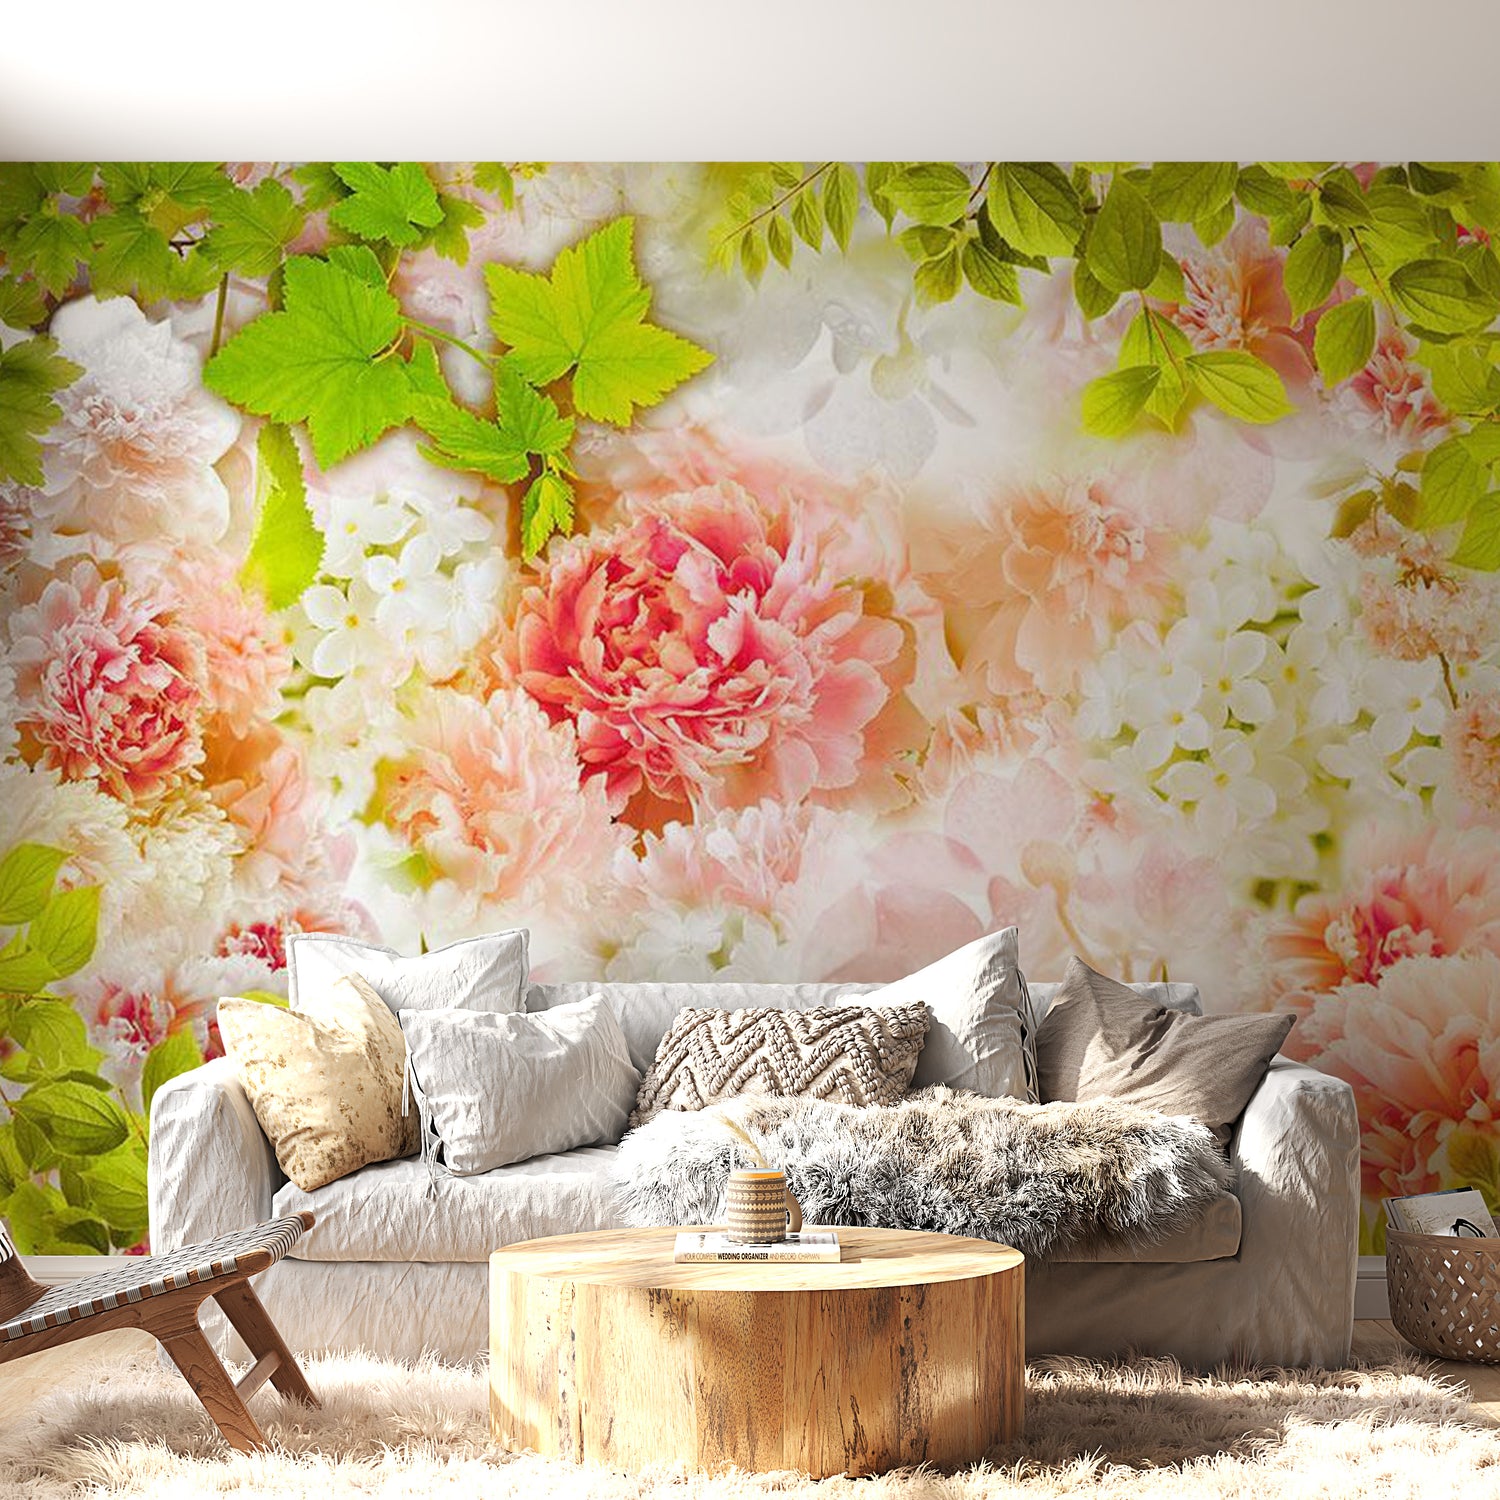 Peel & Stick Floral Wall Mural - Bright Peonies - Removable Wall Decals